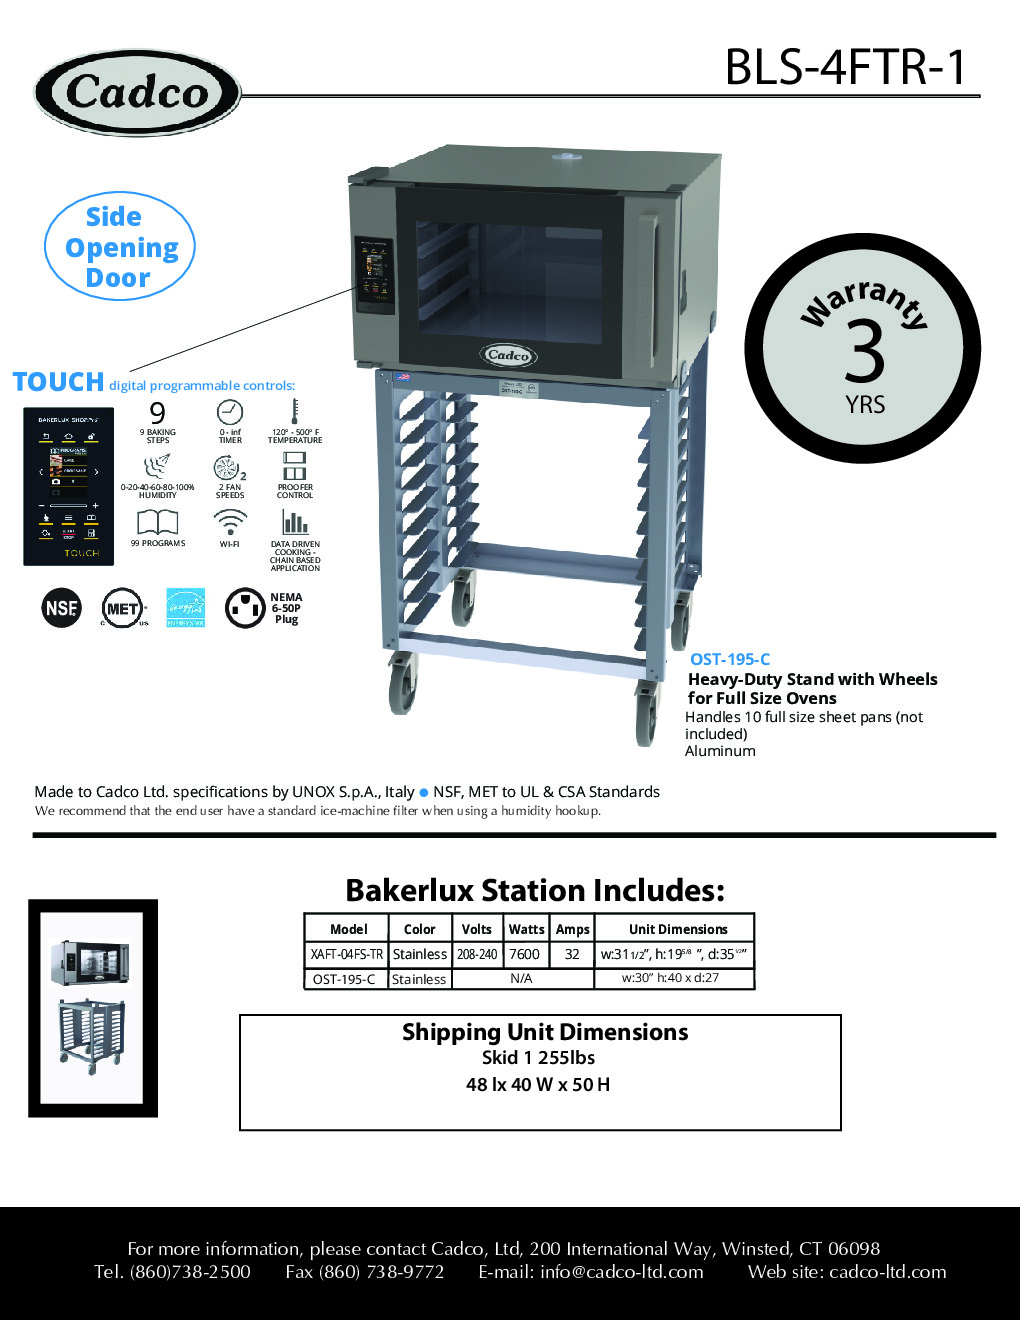 Cadco BLS-4FTR-1 Single-Deck Electric Convection Oven w/ Digital Touch Controls, Full-Size